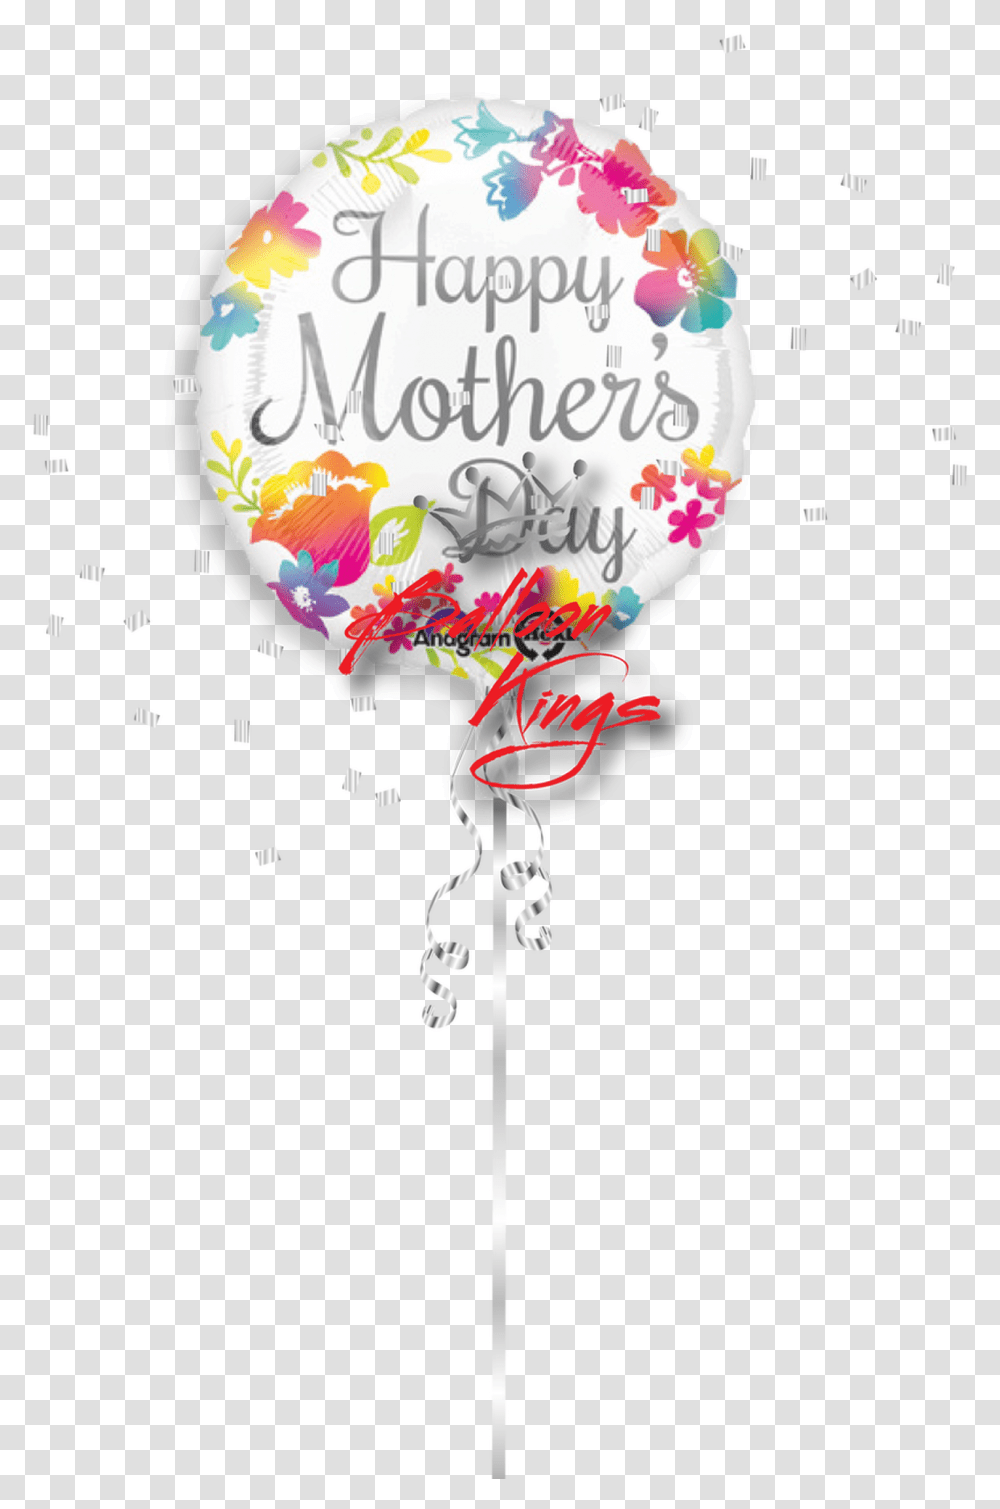 Happy Mothers Day Watercolor Day Balloons Foil, Paper, Birthday Cake, Dessert, Food Transparent Png